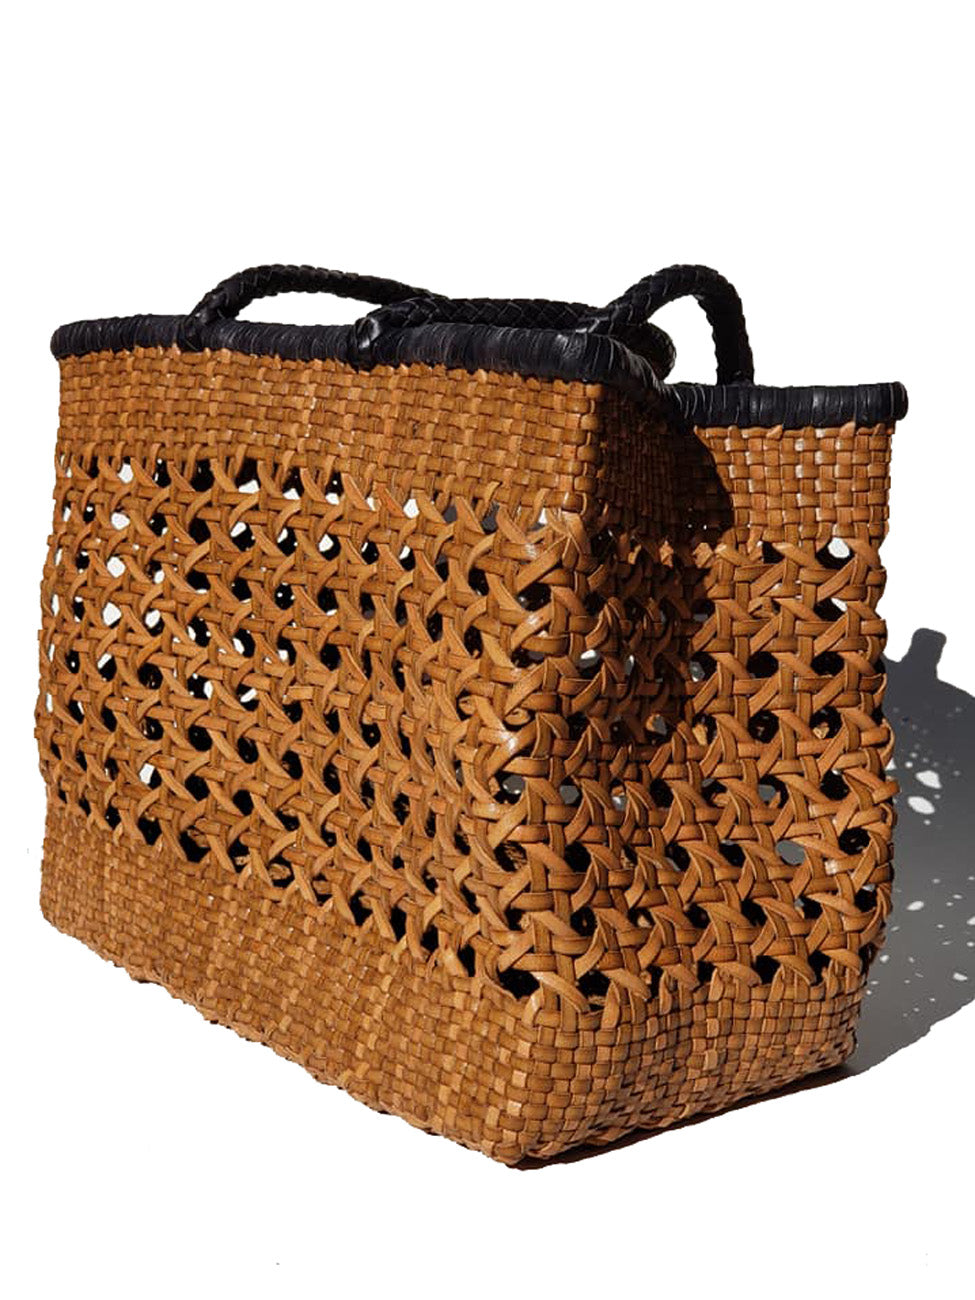 Woven Leather Large Tote Bag Wicker